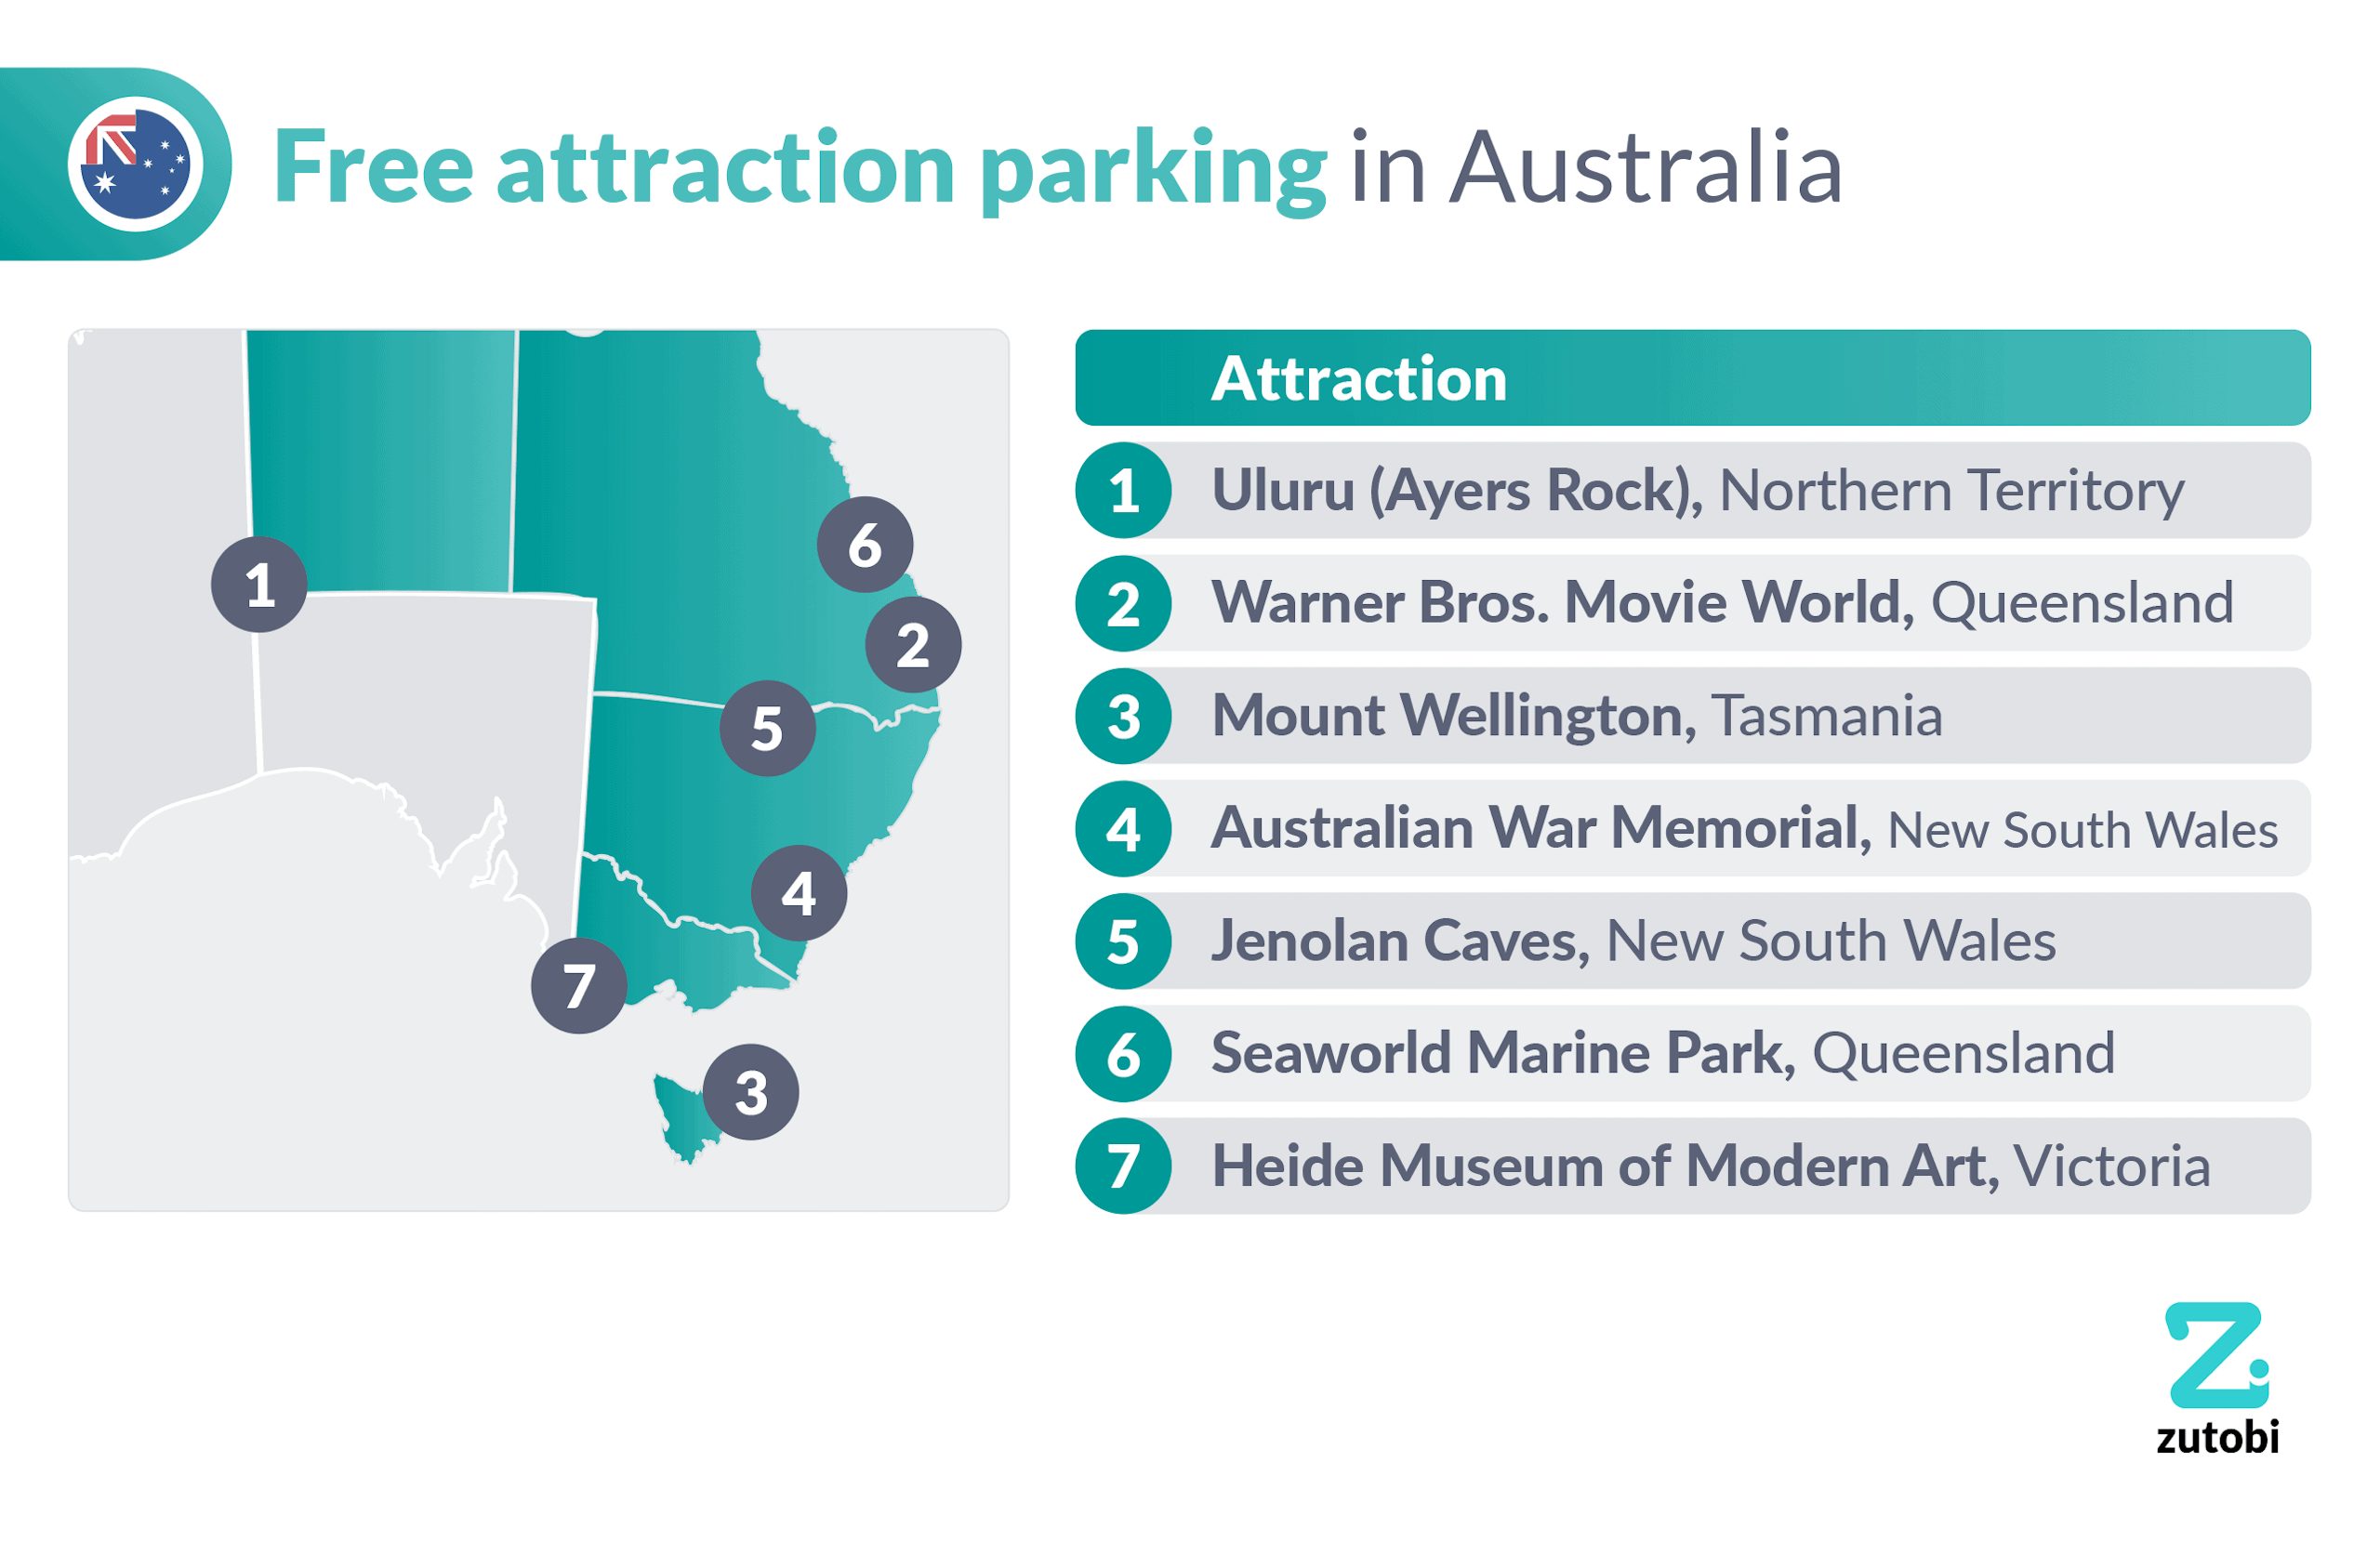 Attractions with free parking